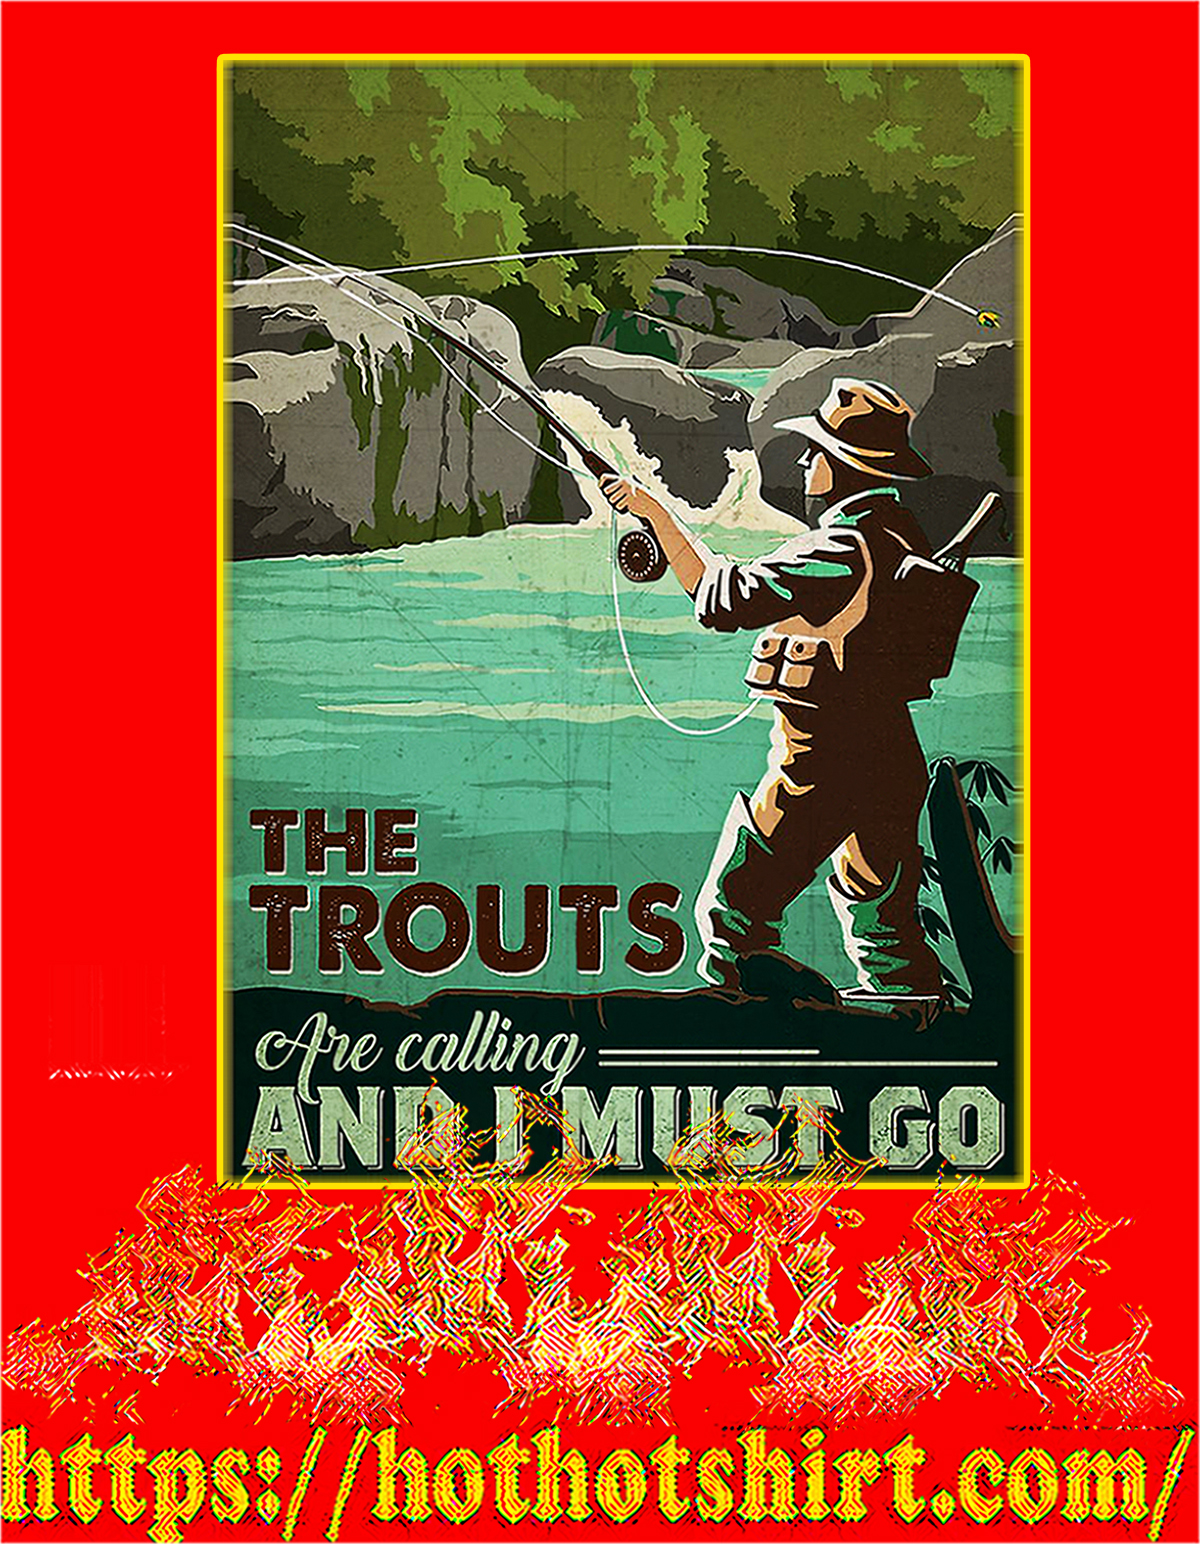 The trouts are calling and I must go poster